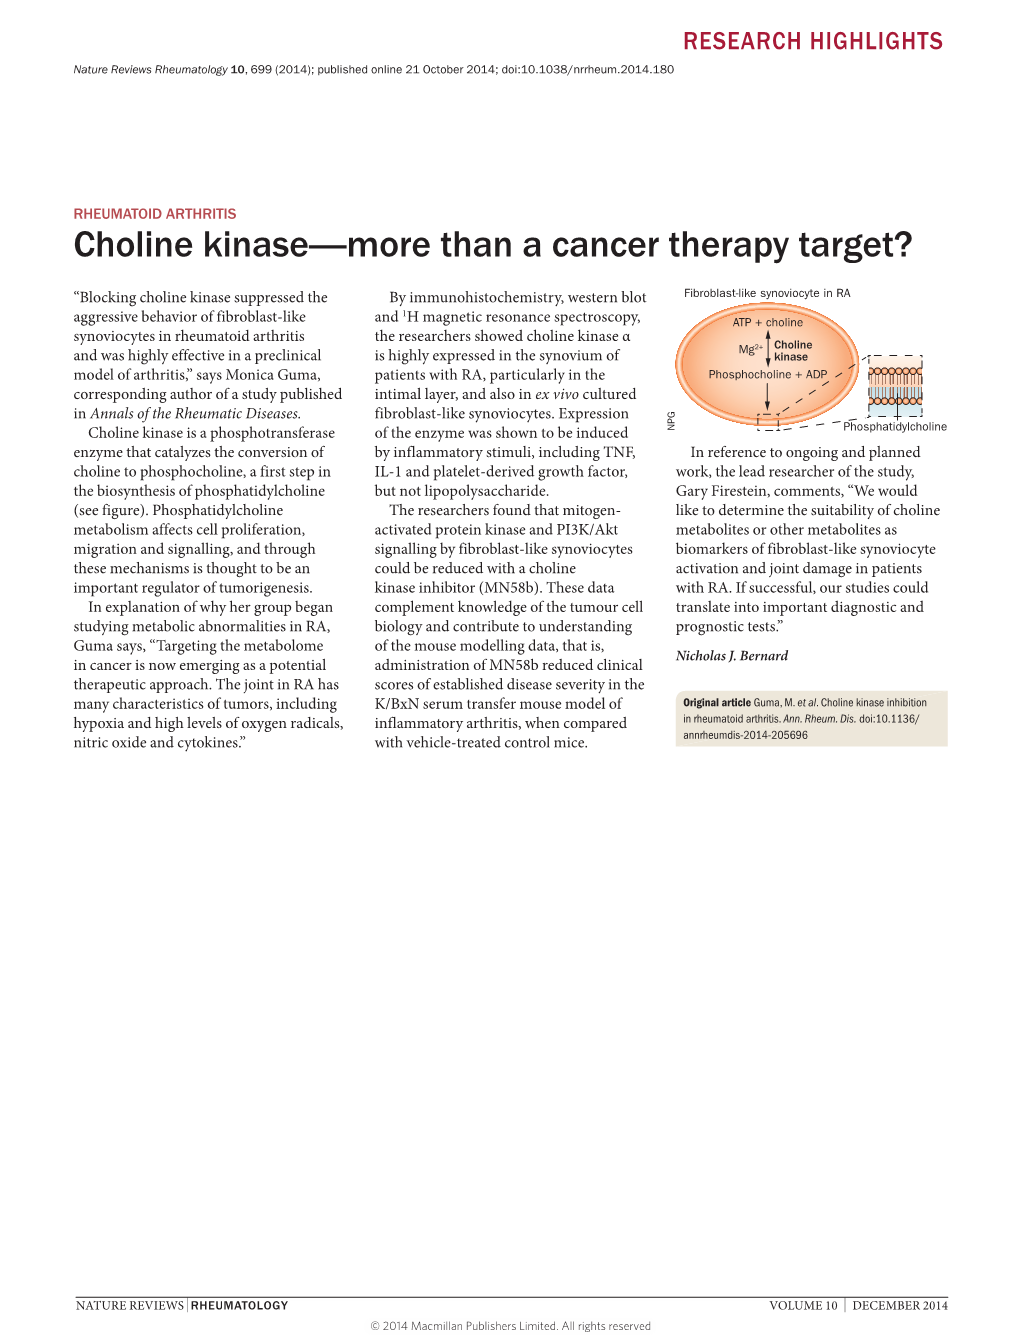 Choline Kinase—More Than a Cancer Therapy Target?